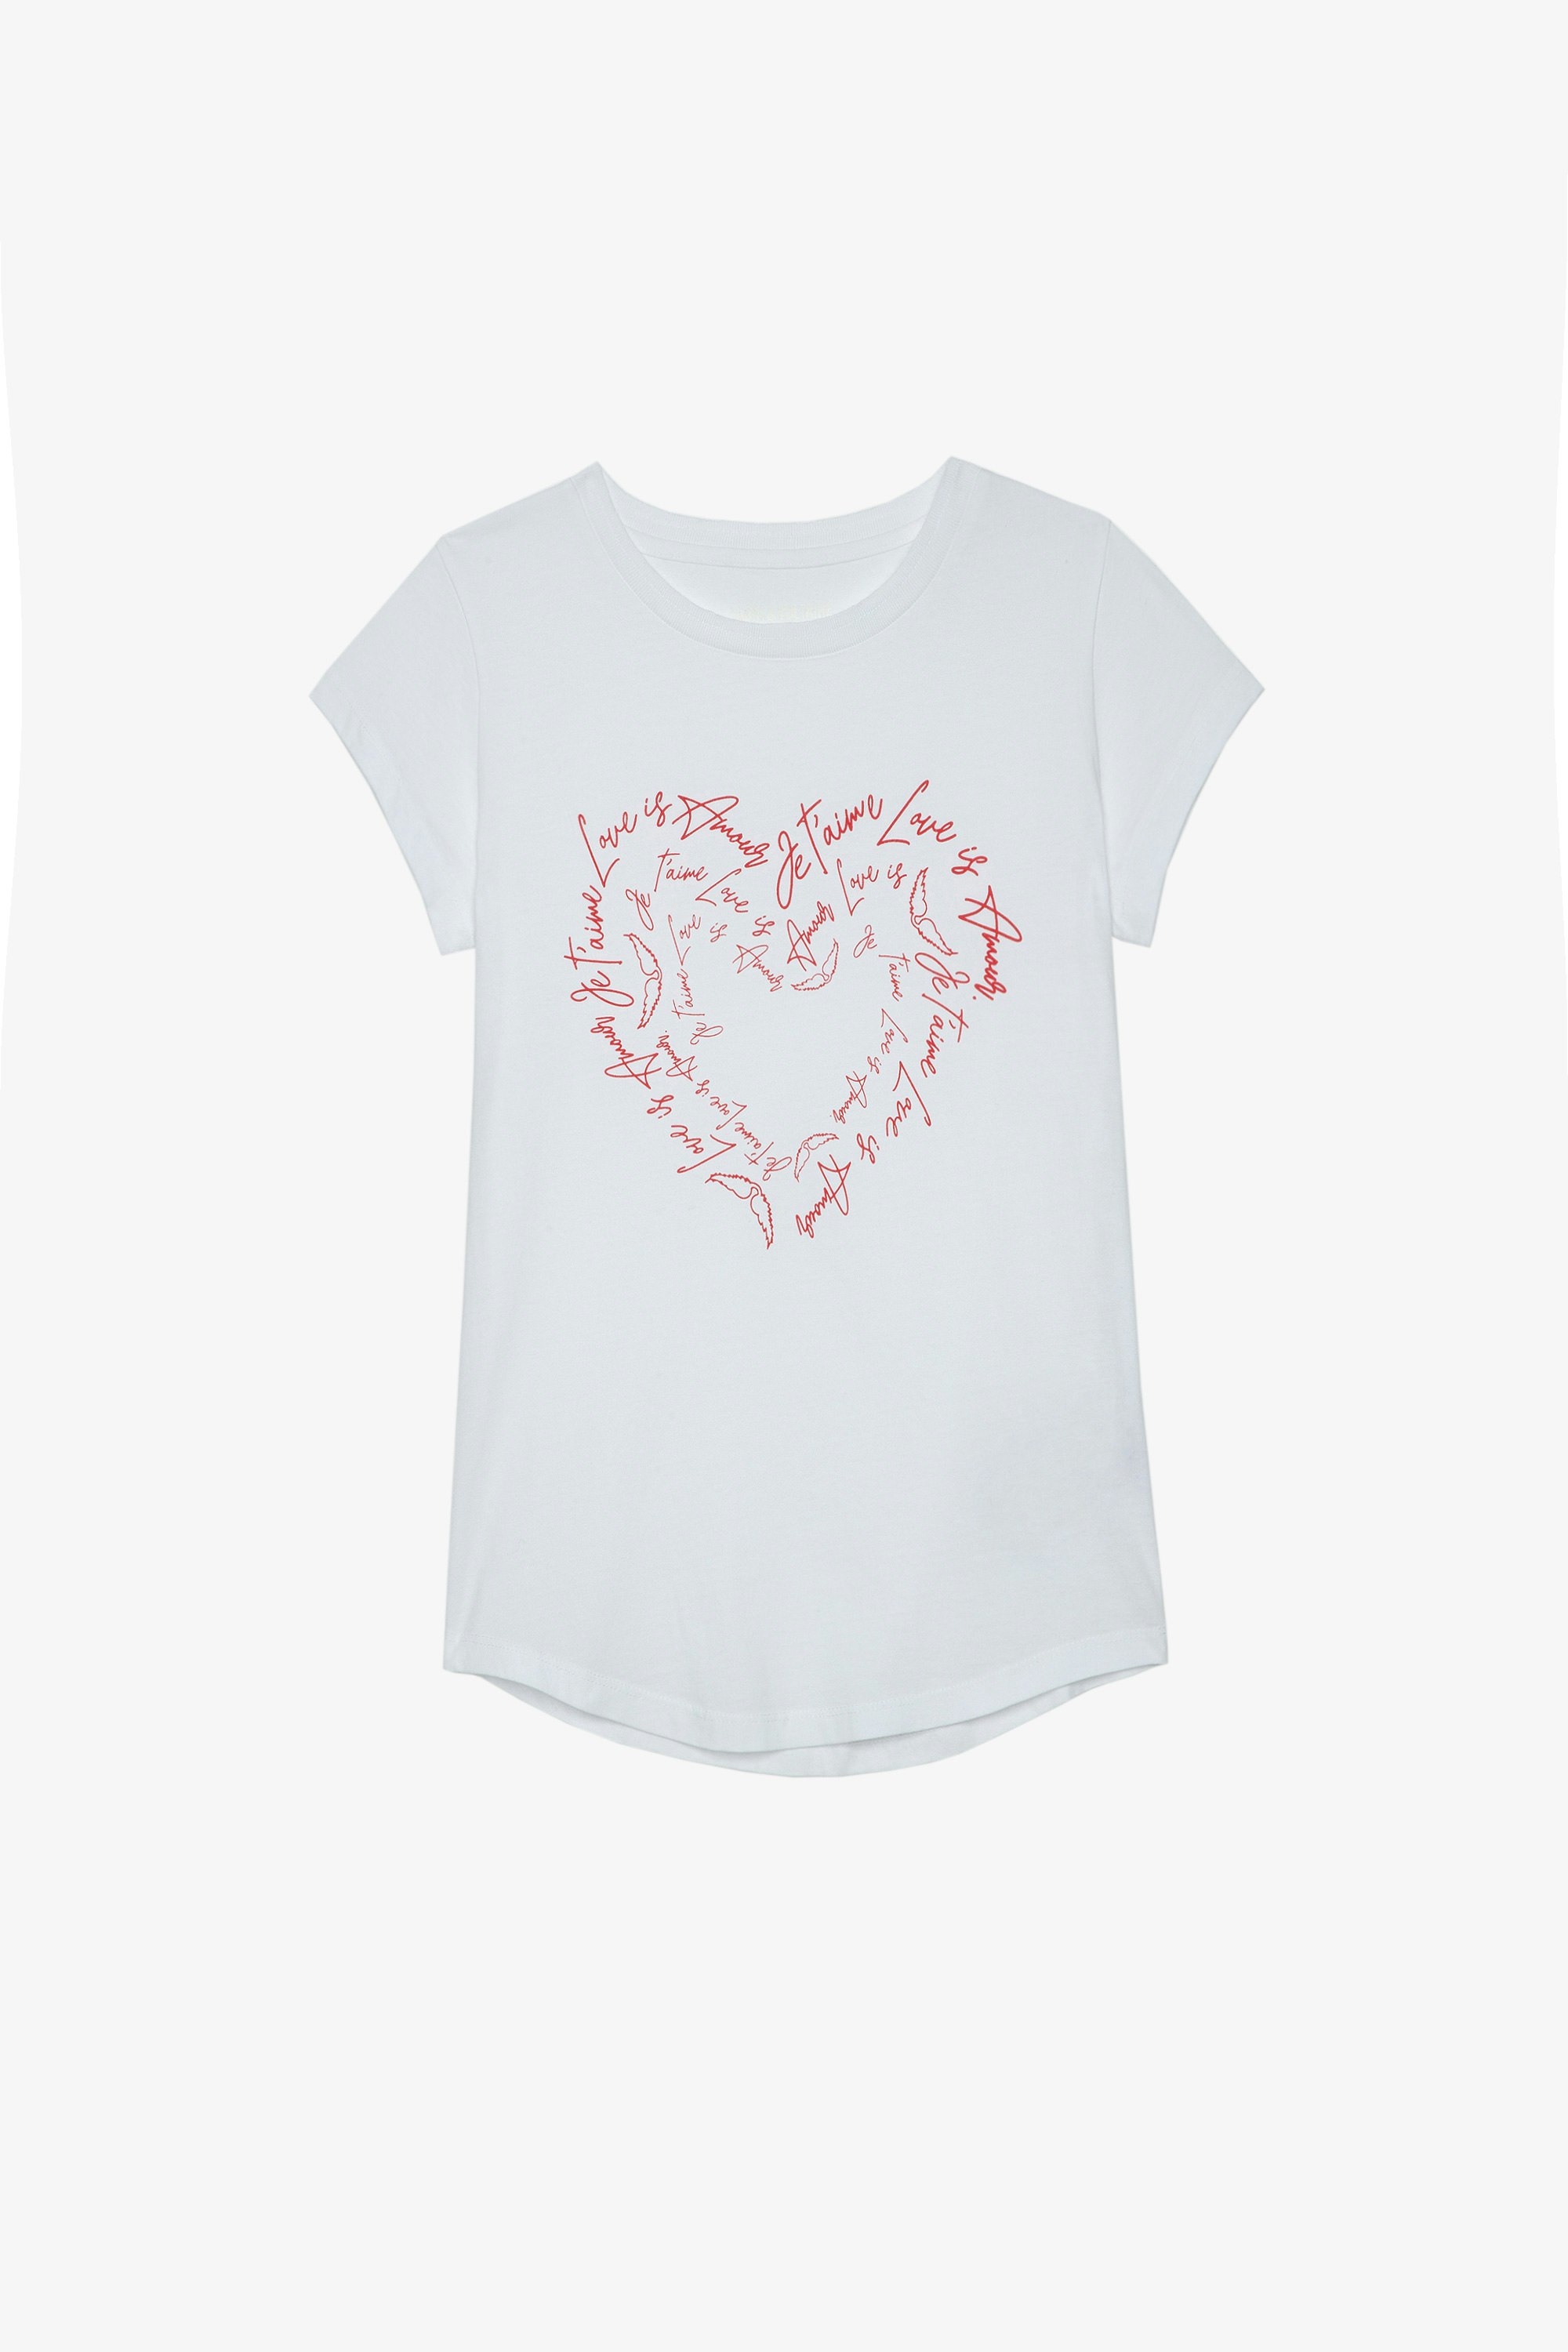 Skinny Heart T-shirt White cotton T-shirt with heart-shaped love slogans and embellished with crystals